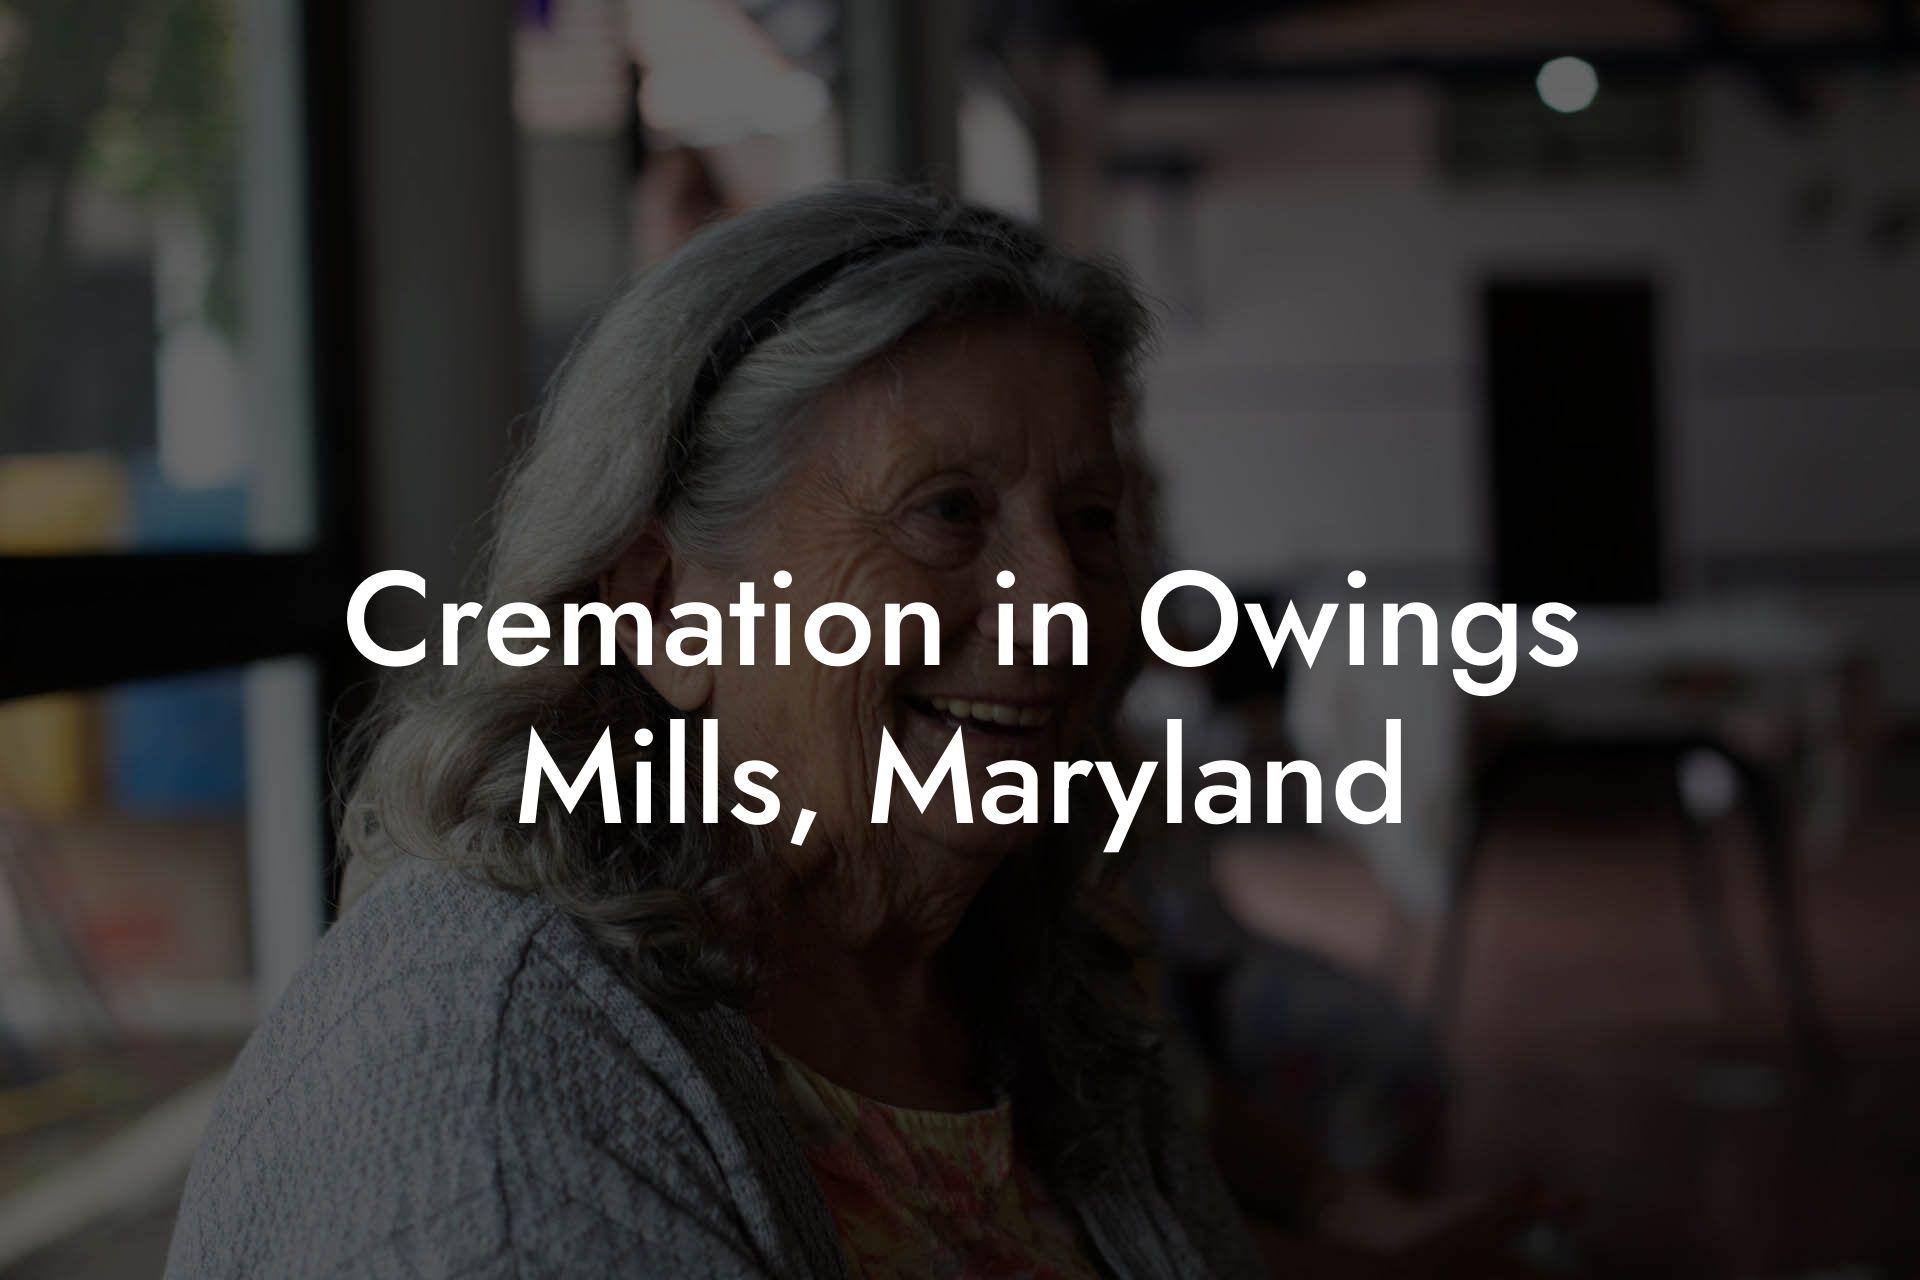 Cremation in Owings Mills, Maryland